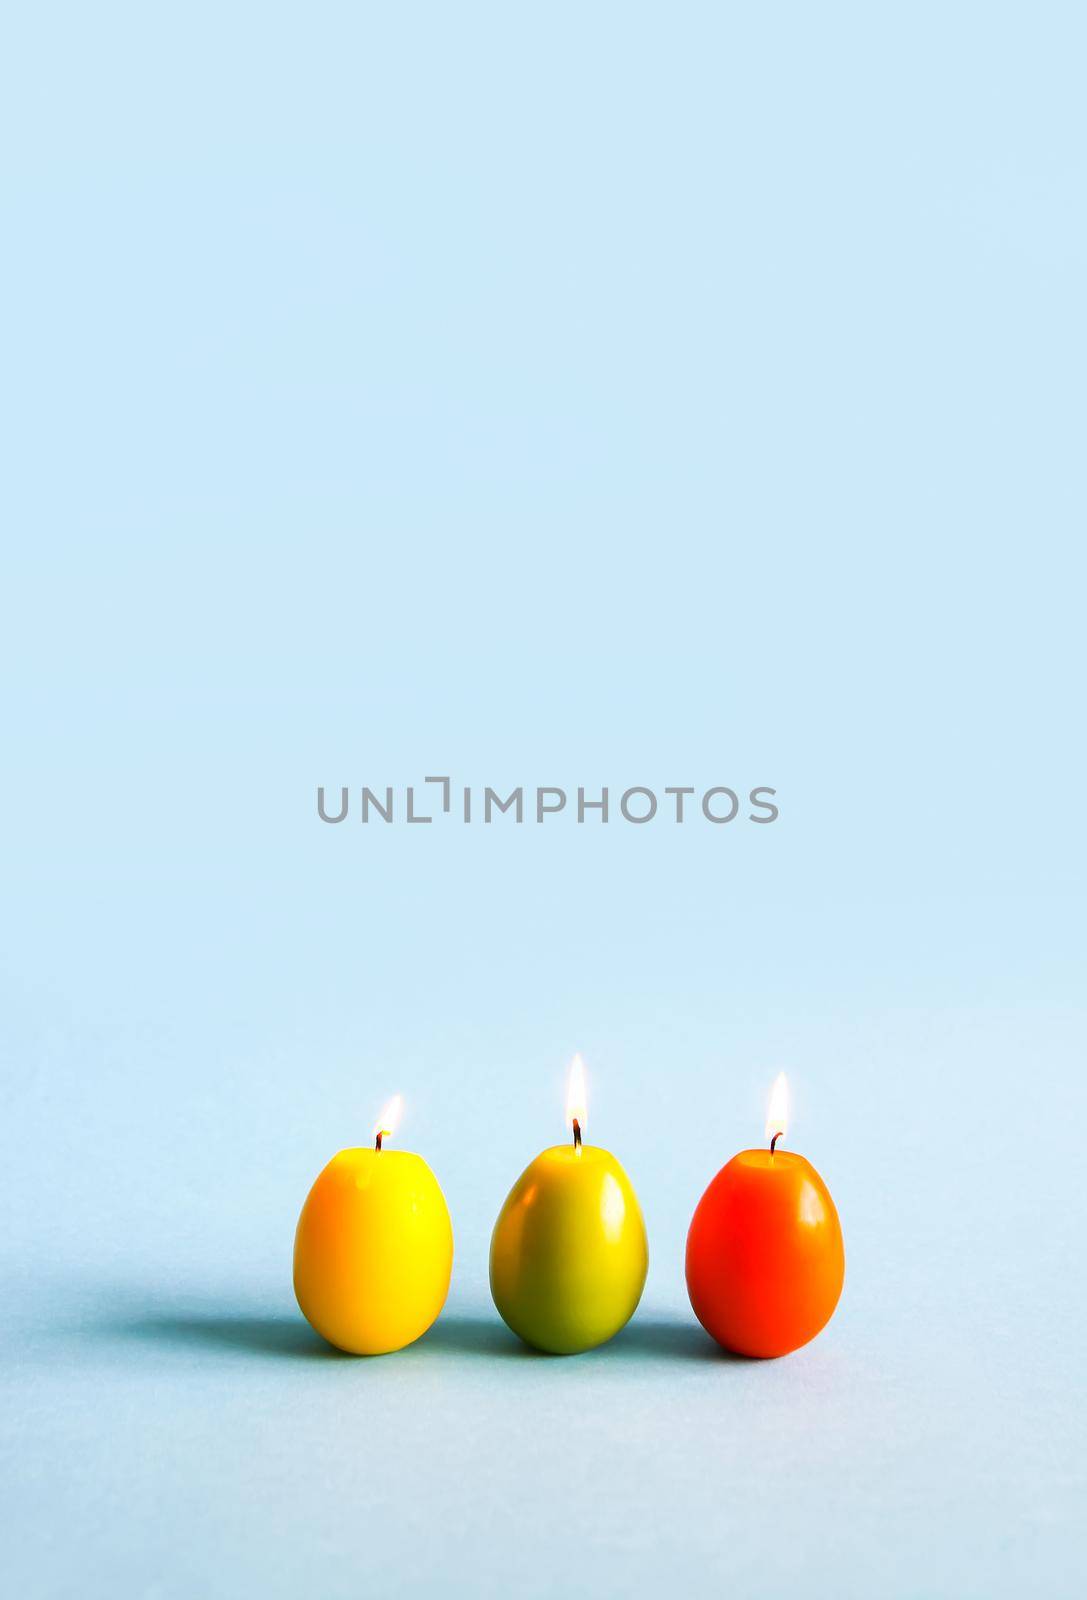 Traditional Easter decor. Bright burning paraffin candles in the shape of colorful eggs on blue background.